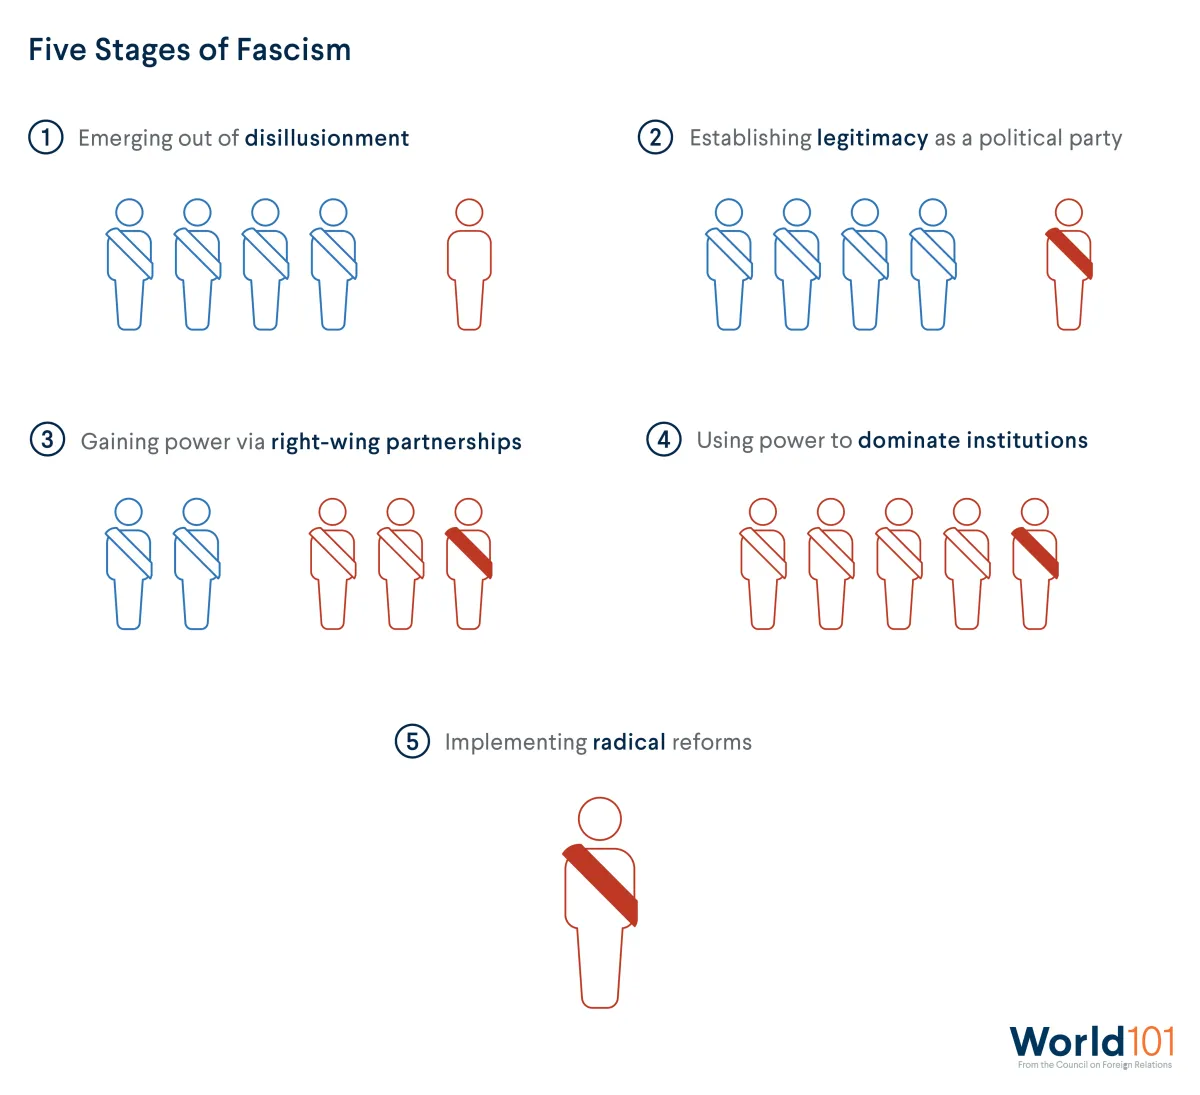 Five Stages of Fascism: 1. Emerging out of disillusionment, 2. Establishing political legitimacy, 3. gaining political power, 4. Dominating Institutions, 5. Radical reforms. For more info contact us at world101@cfr.org.